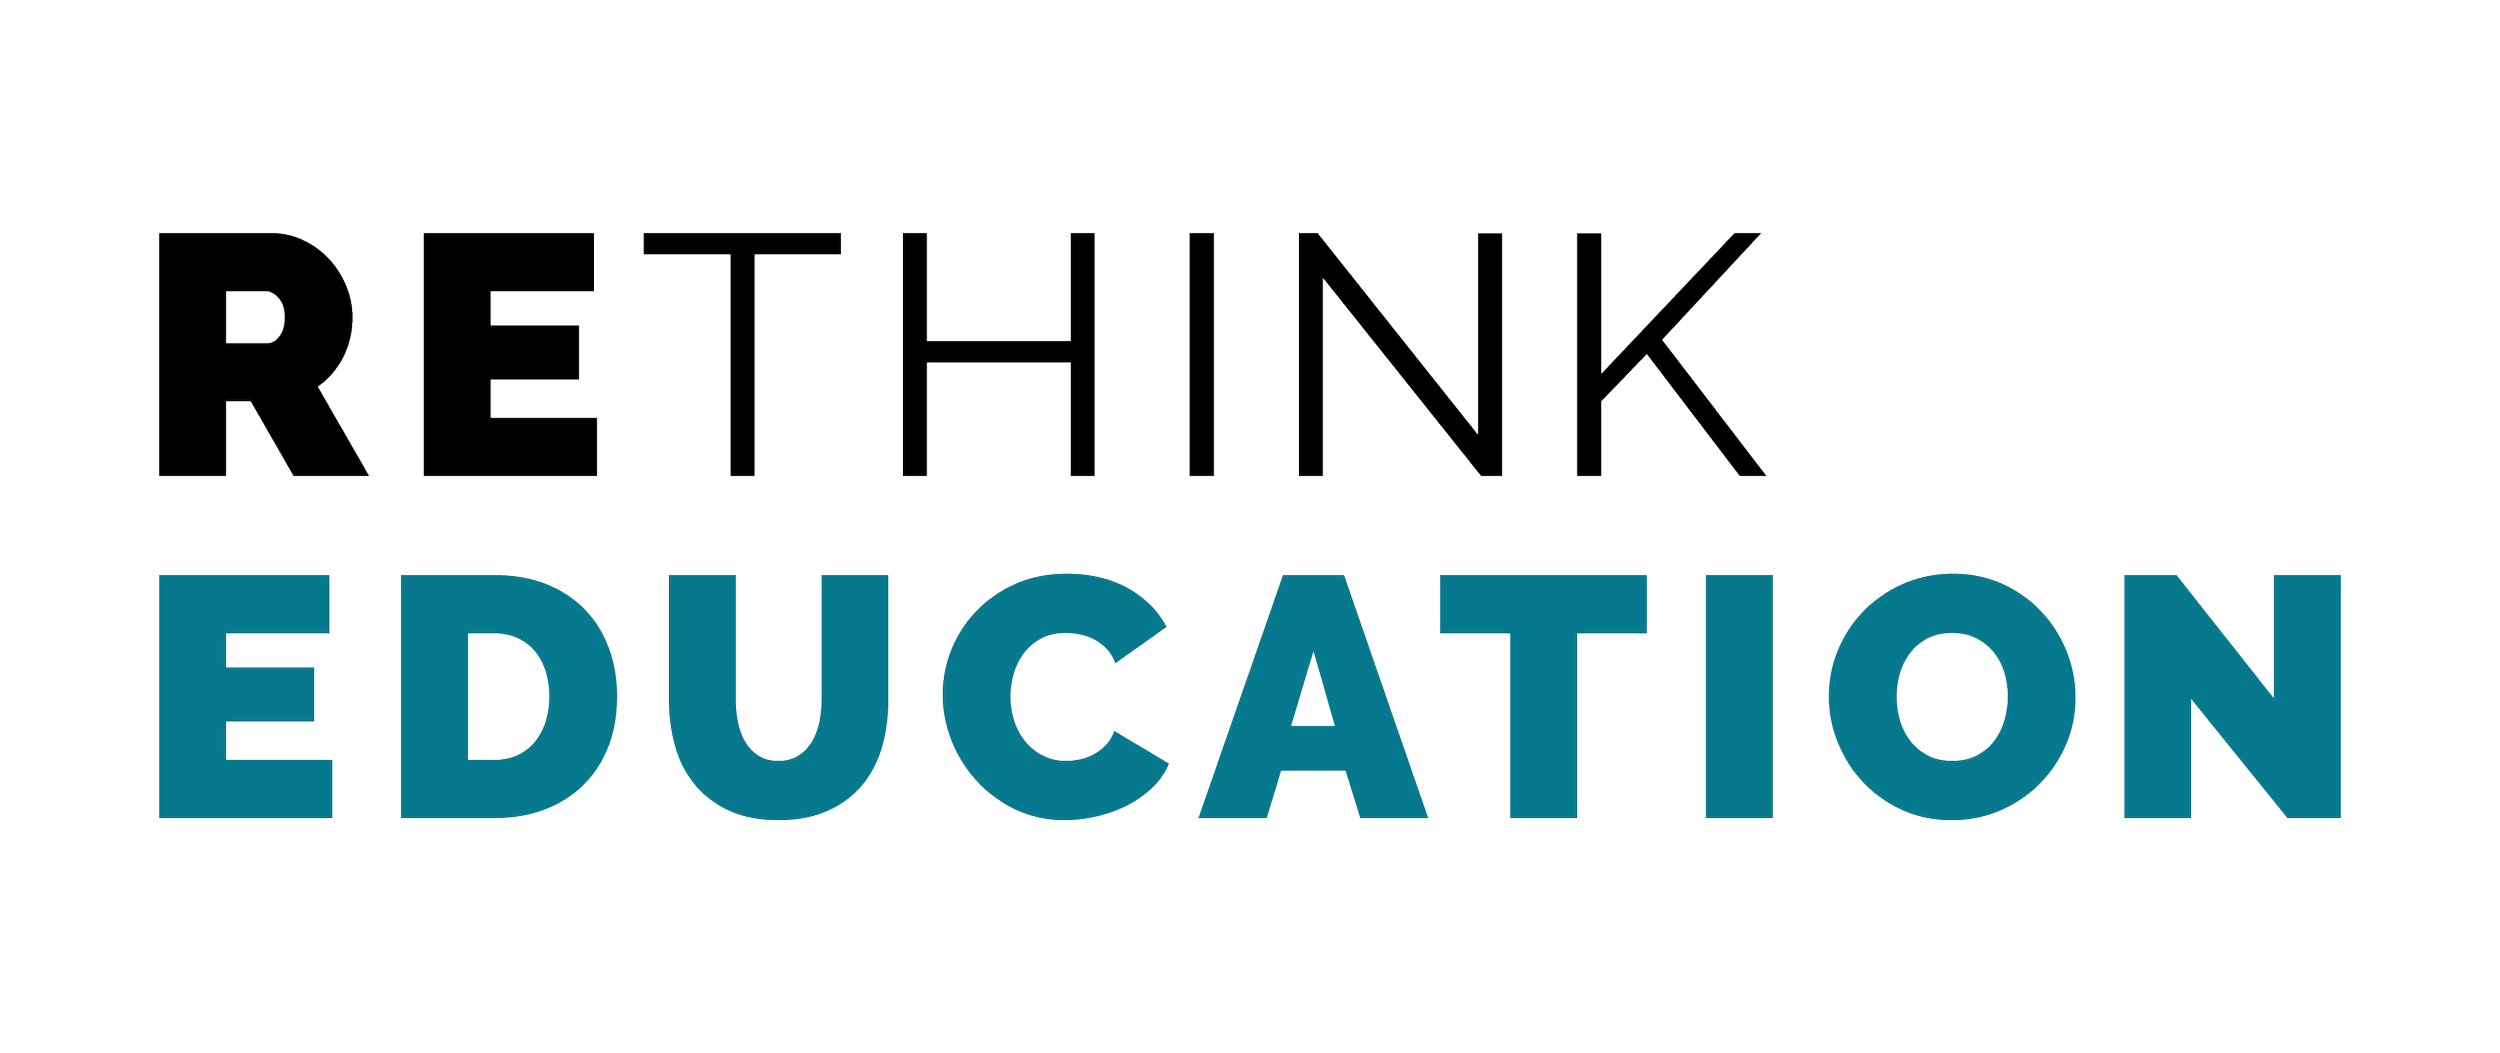 VCTO-006-Rethink-Education-Primary-DEVr1-Color.png